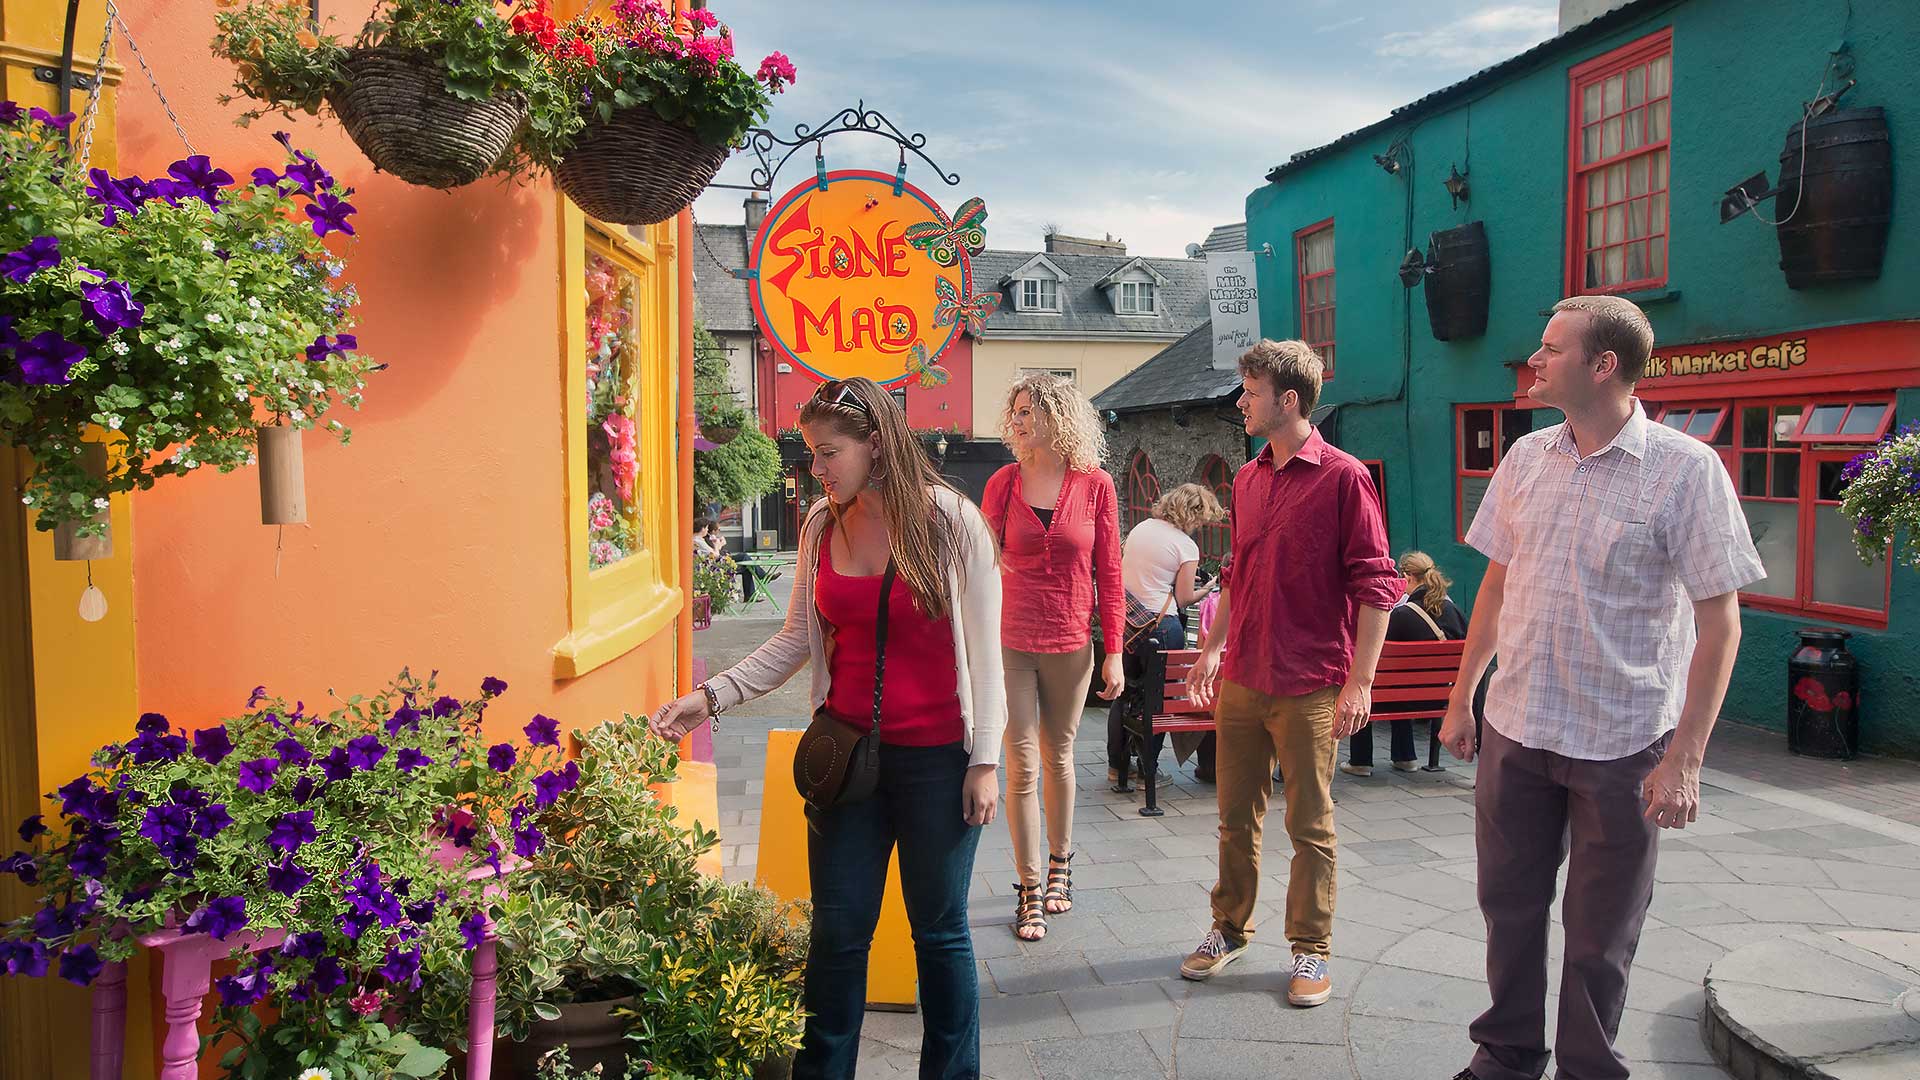 People explore Kinsale, Co Cork, passing the Stone Mad Gallery